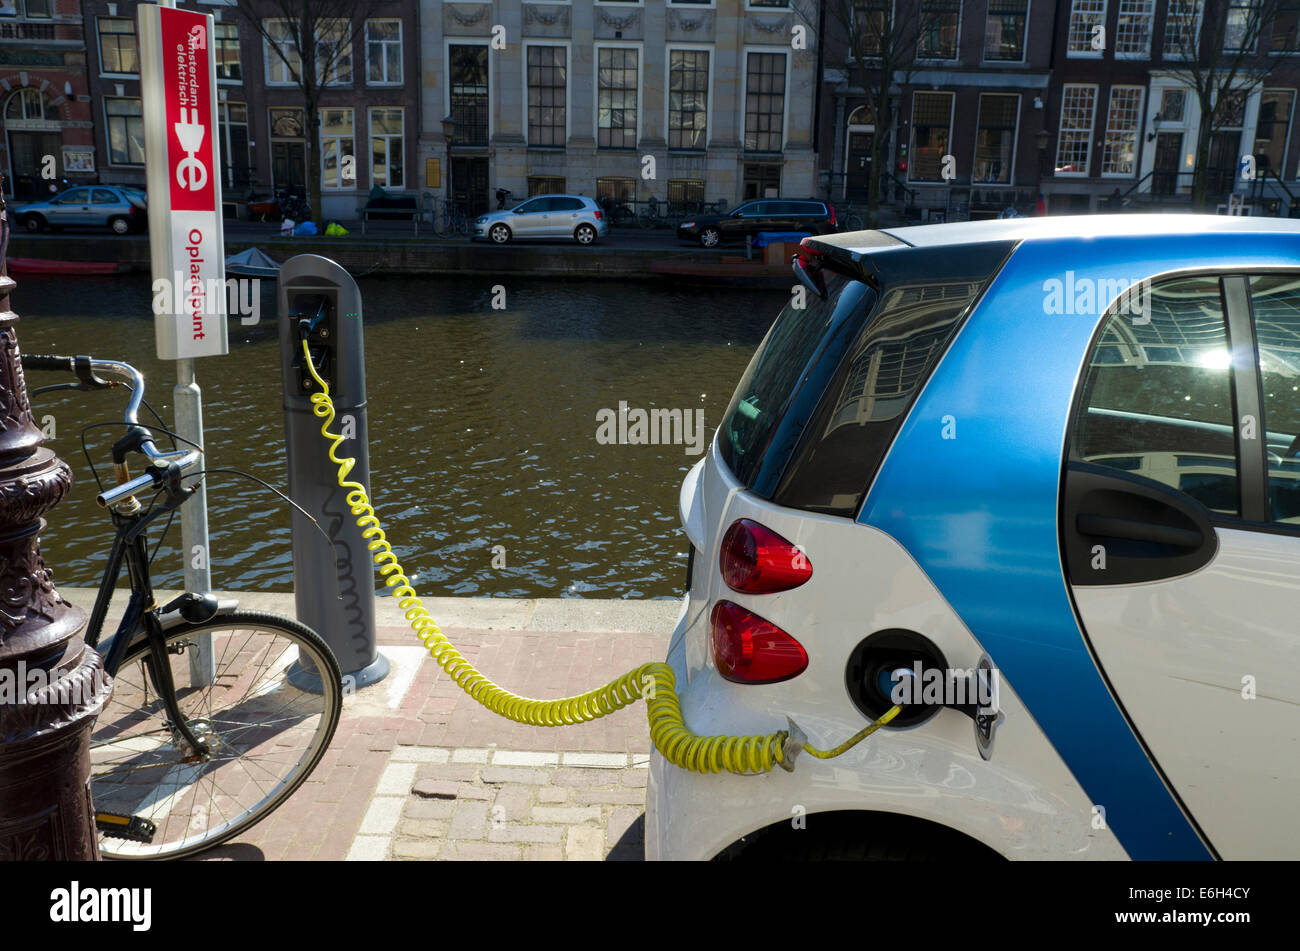 electric car plugged in next to an amsterdam canal Stock Photo